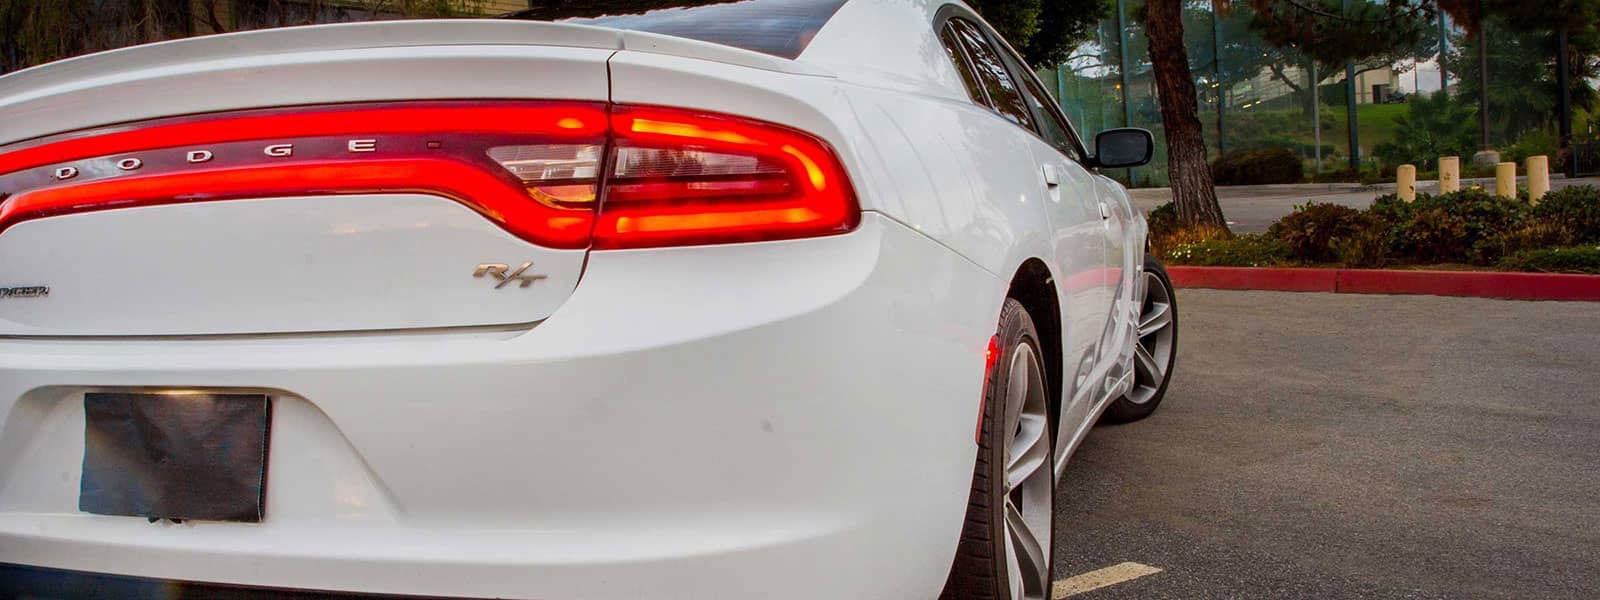 Used dodge charger 